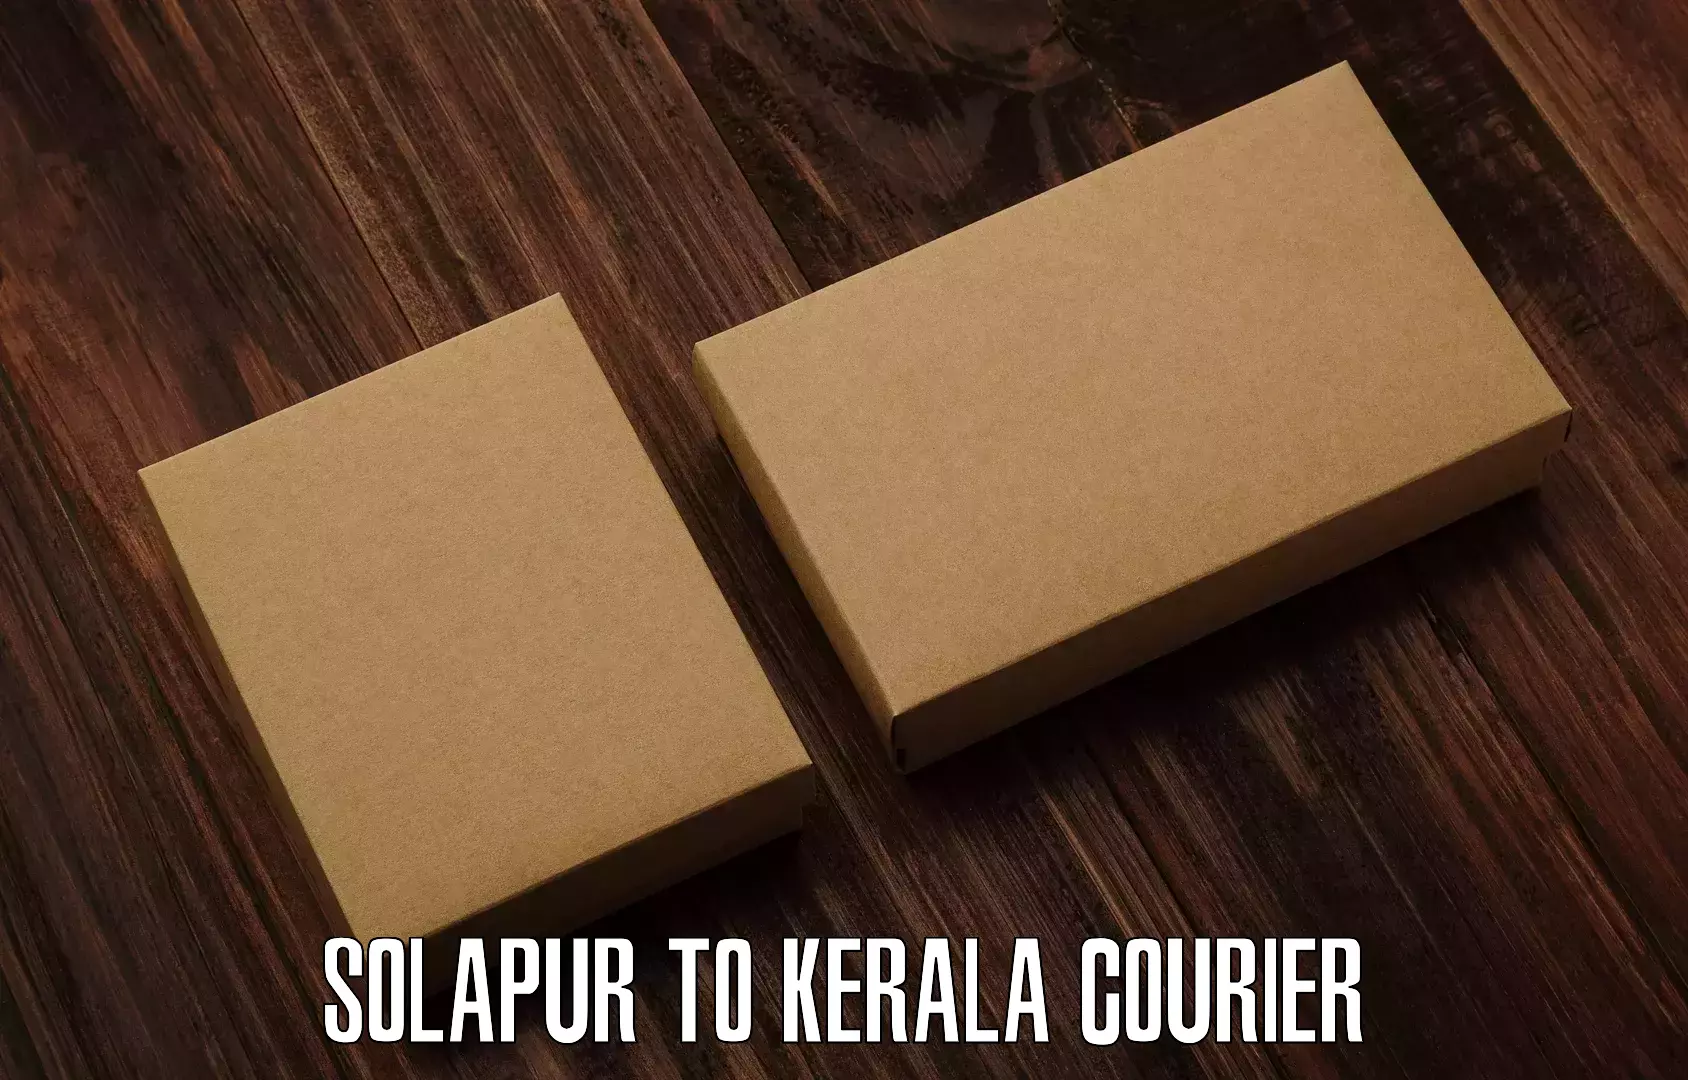 Large-scale shipping solutions Solapur to Cochin Port Kochi